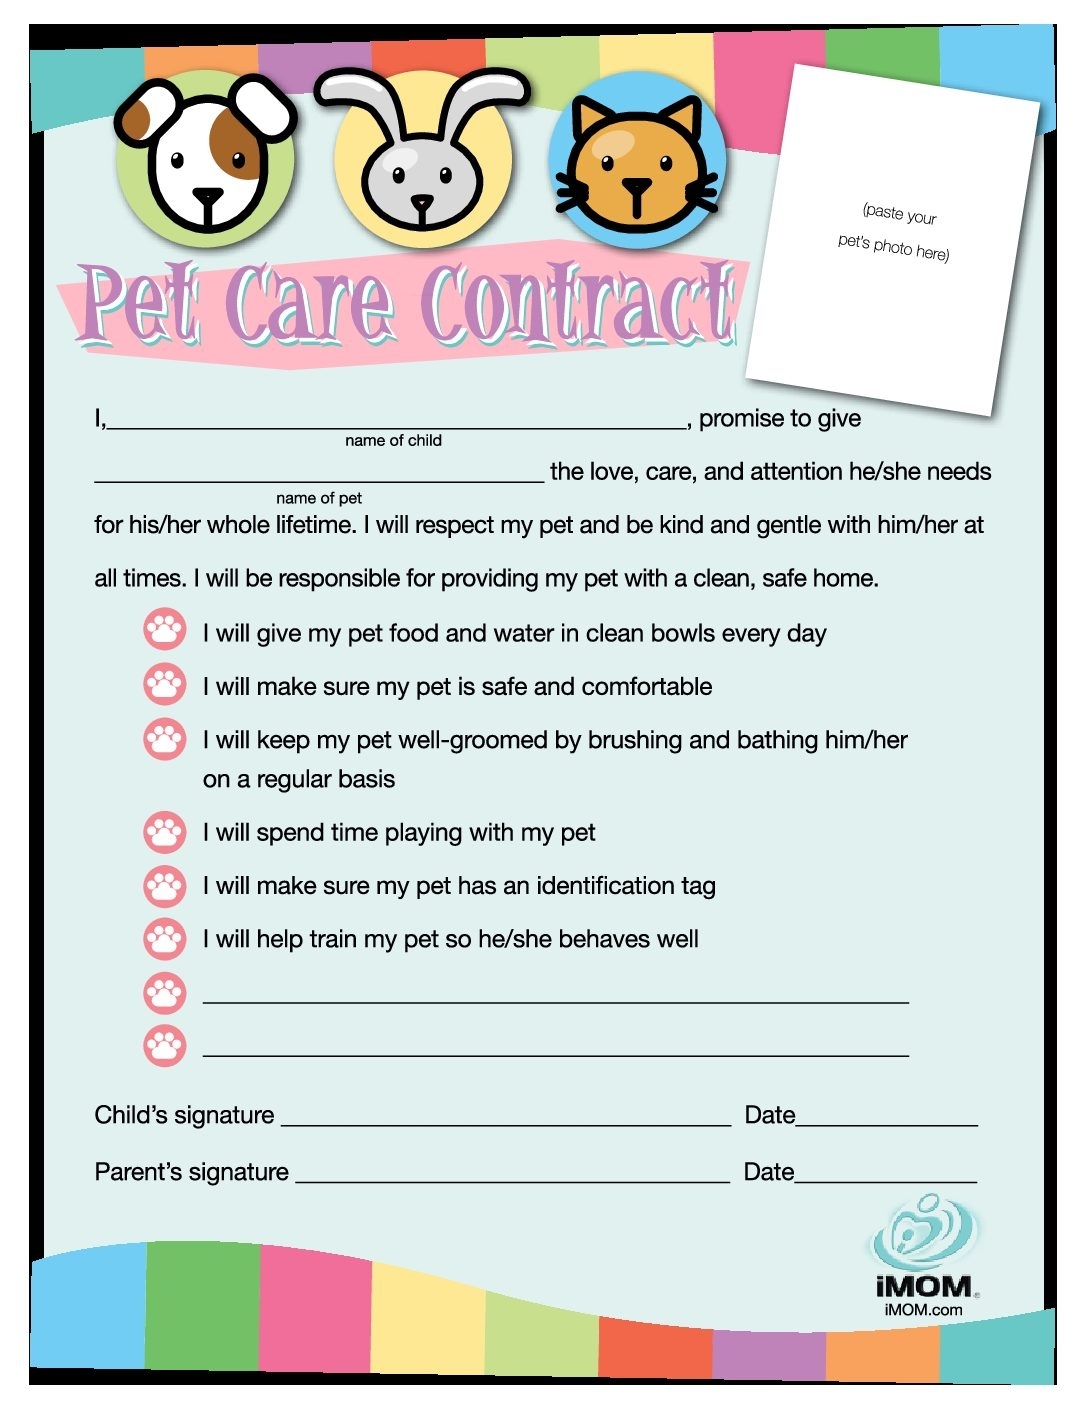 Pet Care Contract - Imom